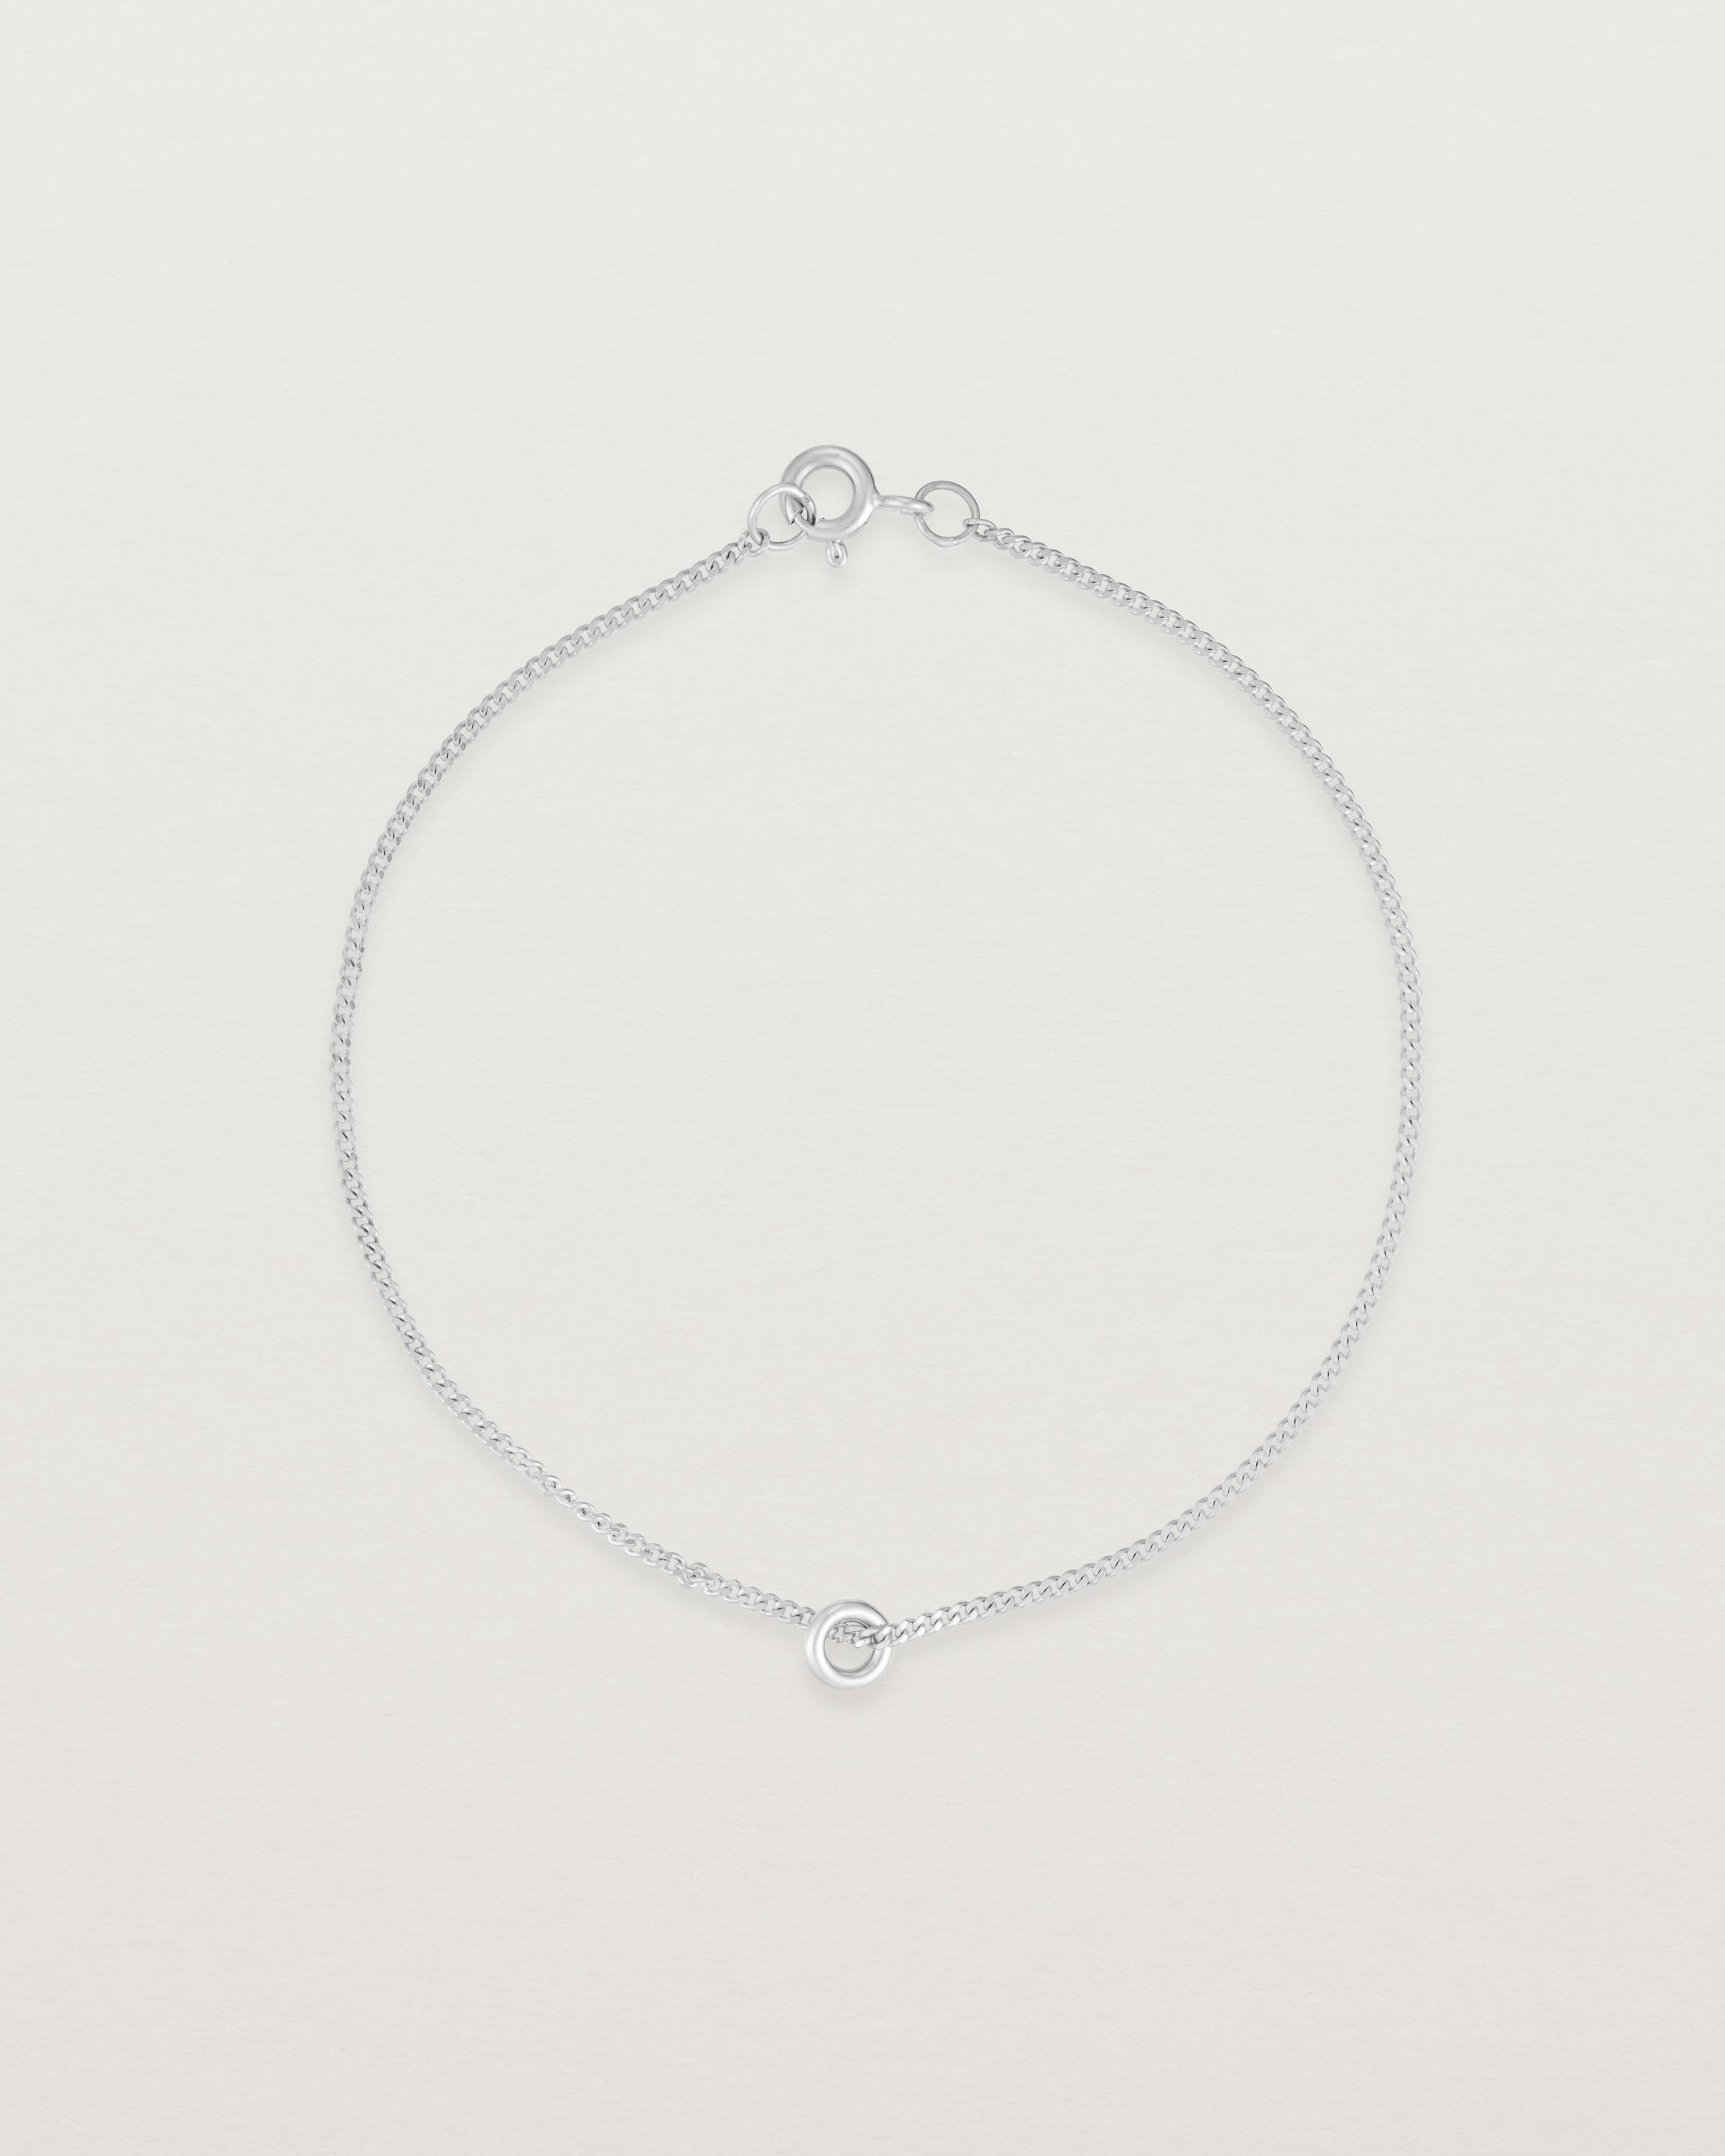 Top view of the Aether Bracelet showing one round charm in sterling silver